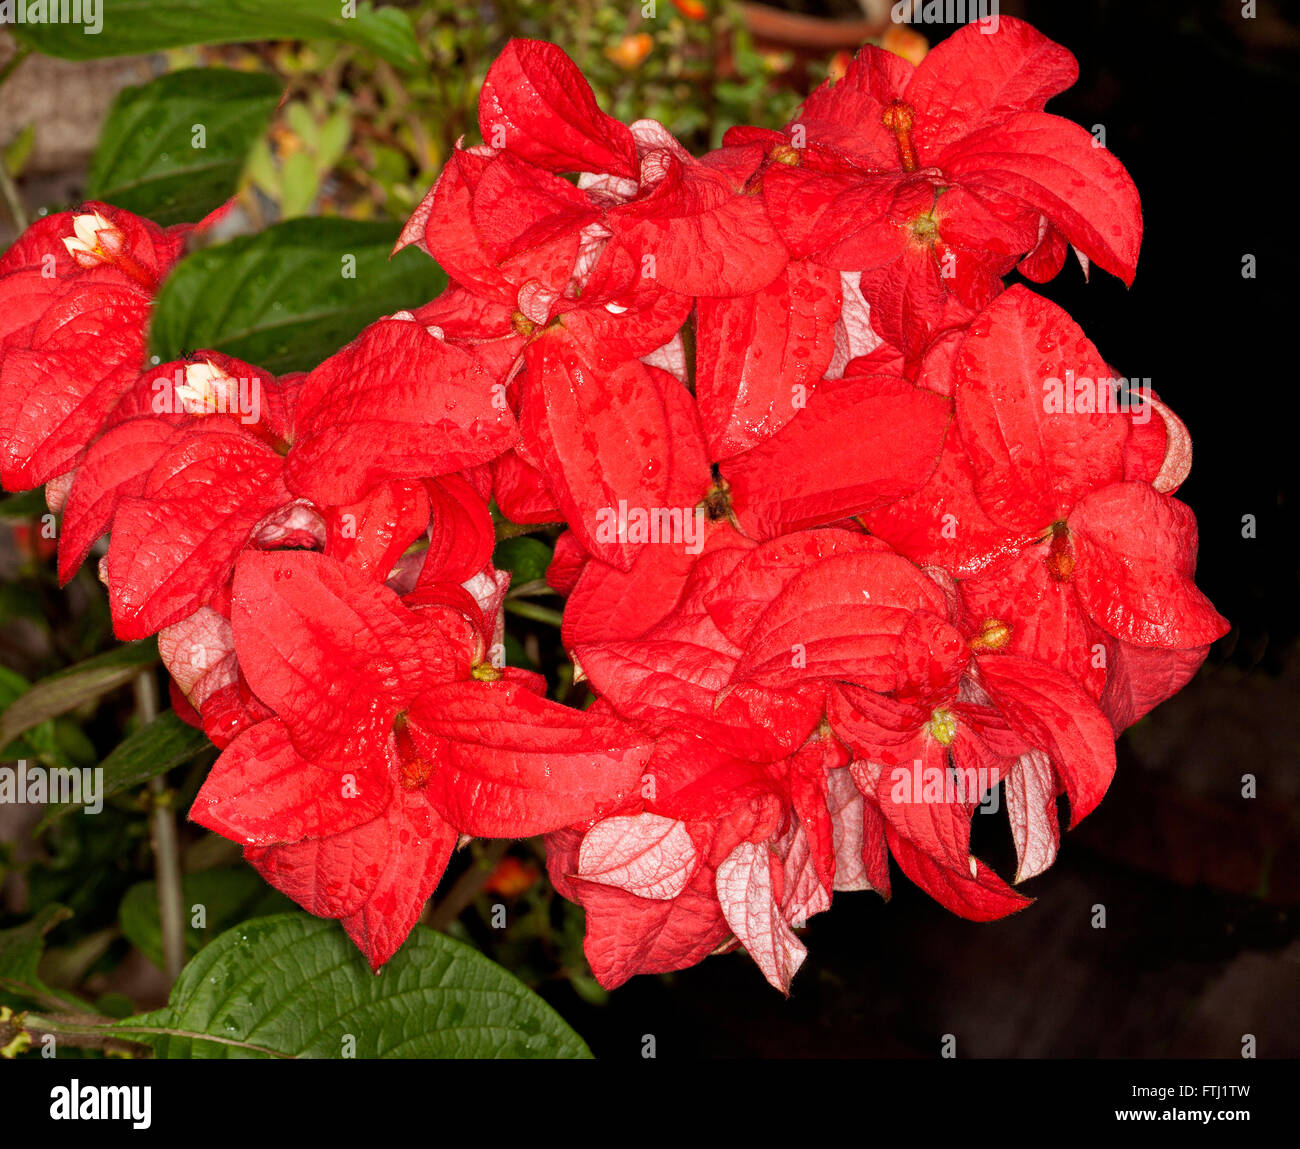 Large cluster of vivid red bracts, flowers & green leaves of Mussaenda Capricorn Dream, unusual deciduous tropical shrub on dark background Stock Photo